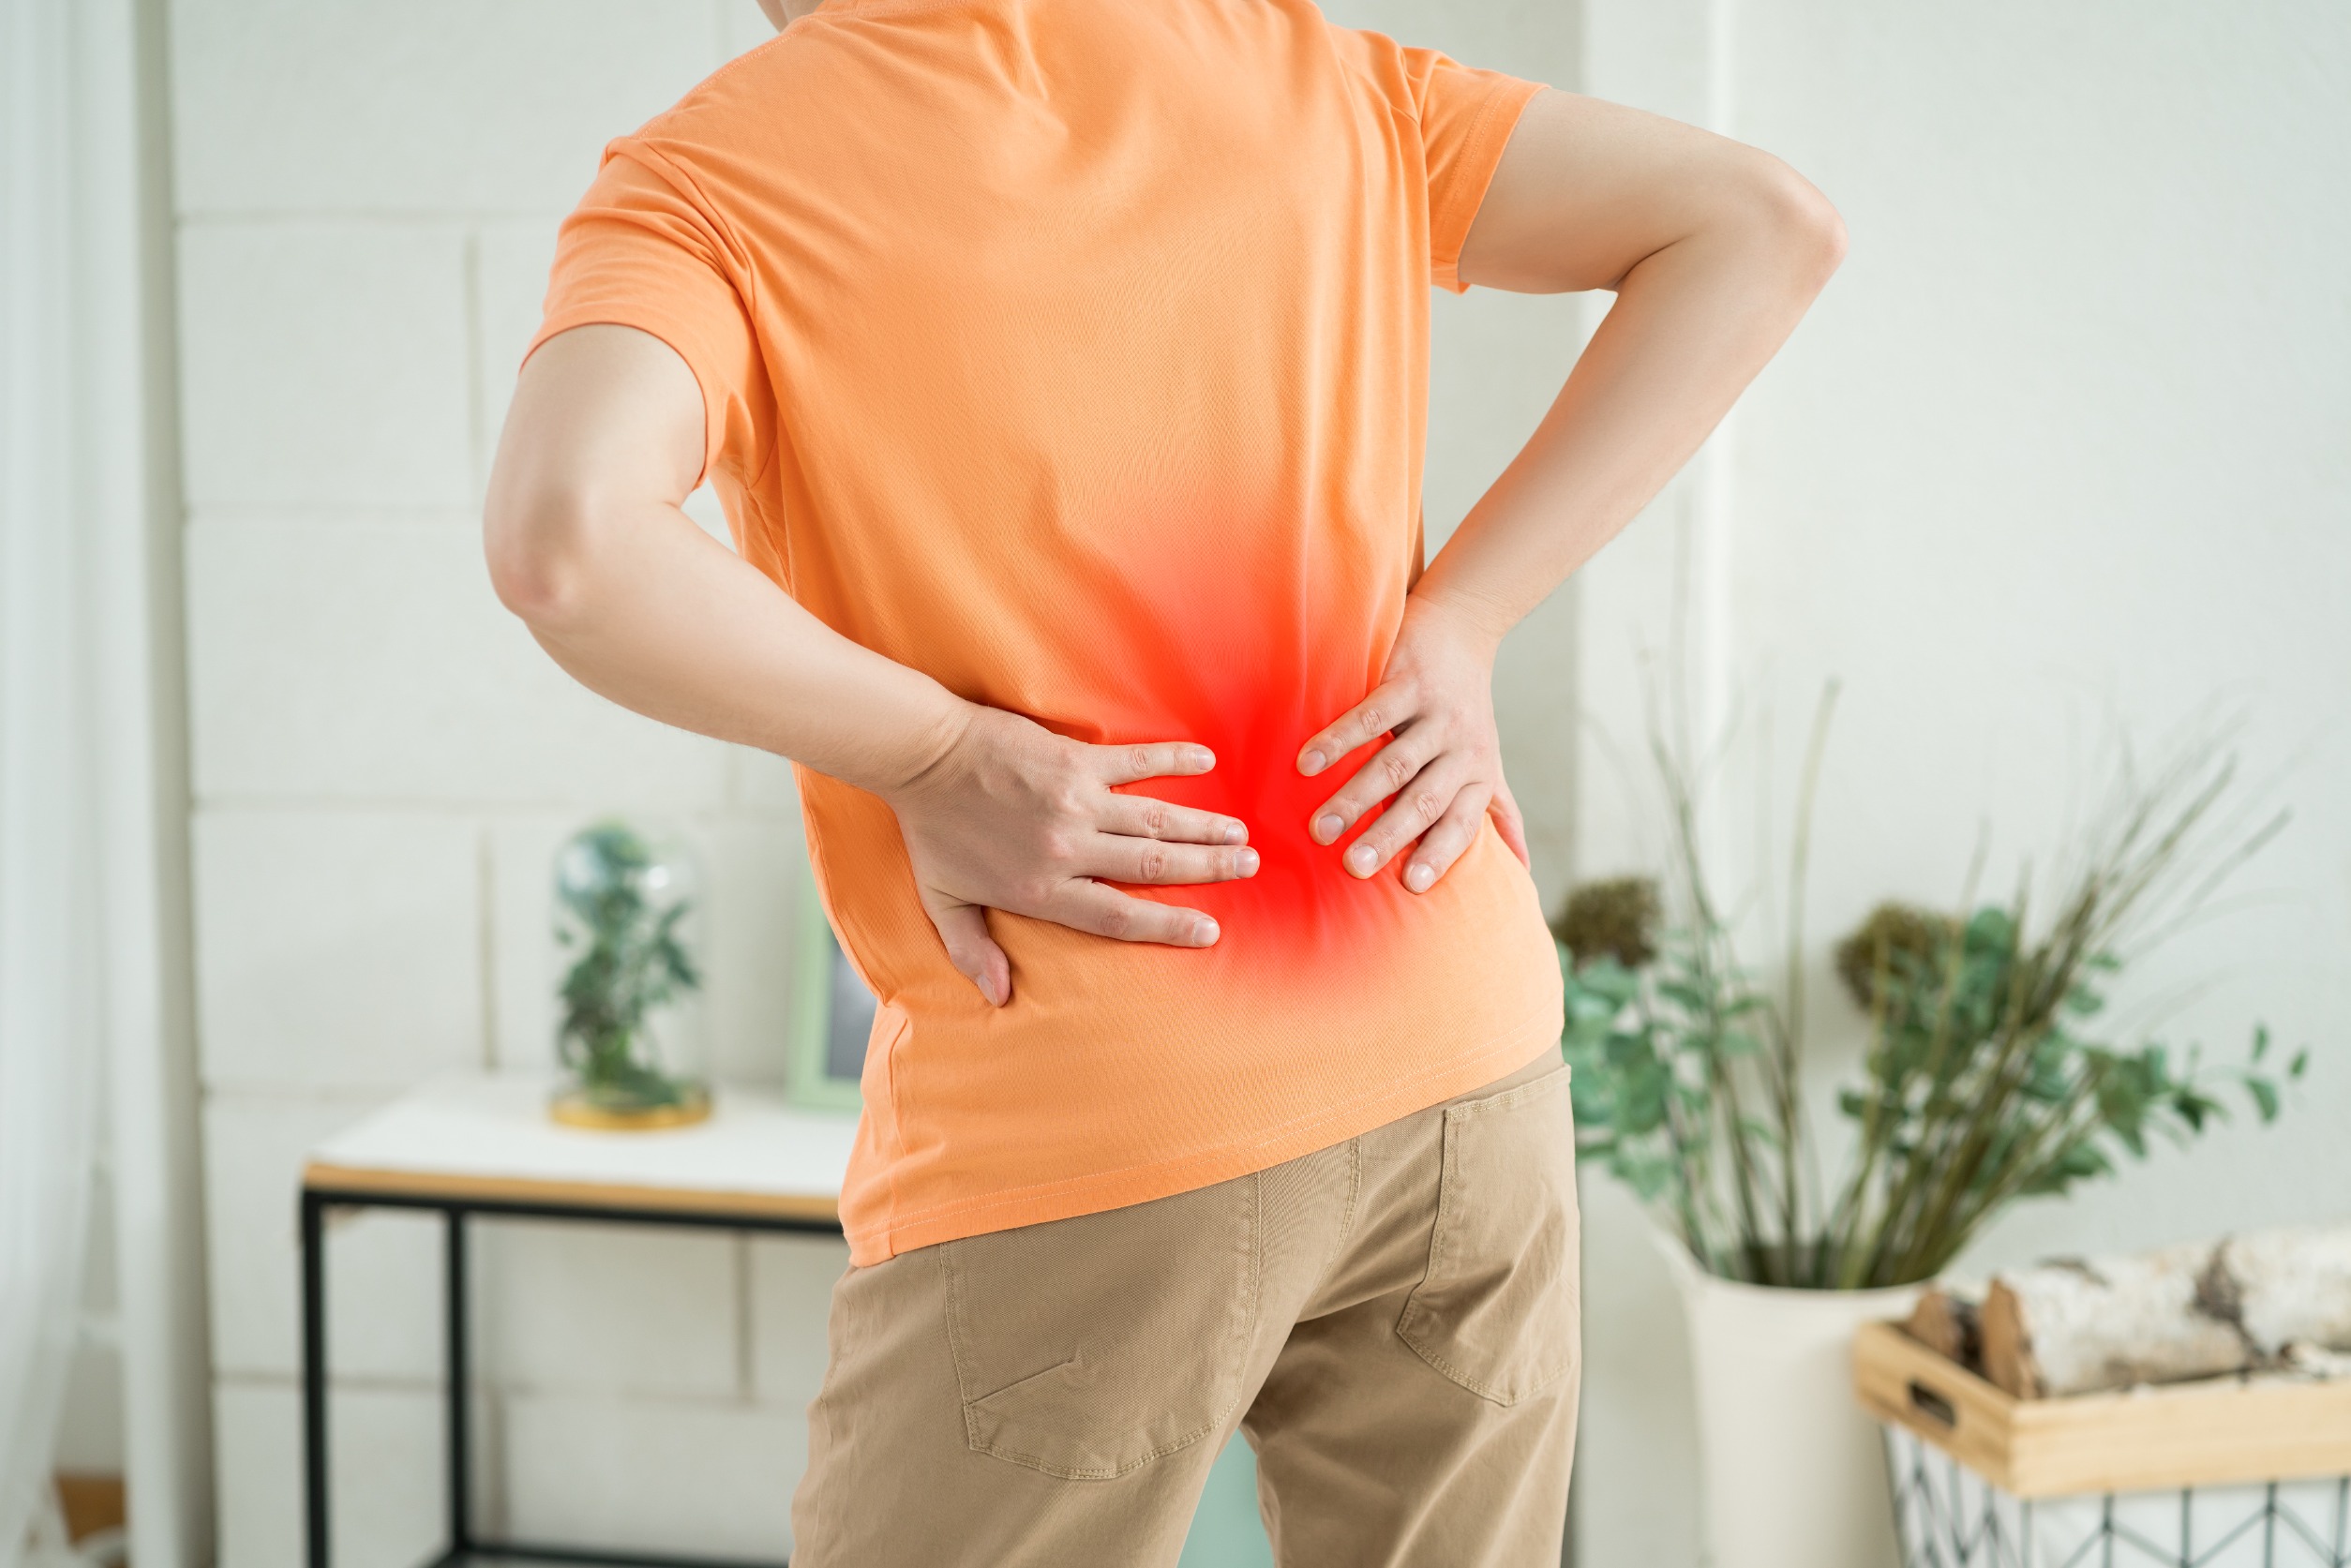 Warning Signs You Have a Herniated Disc